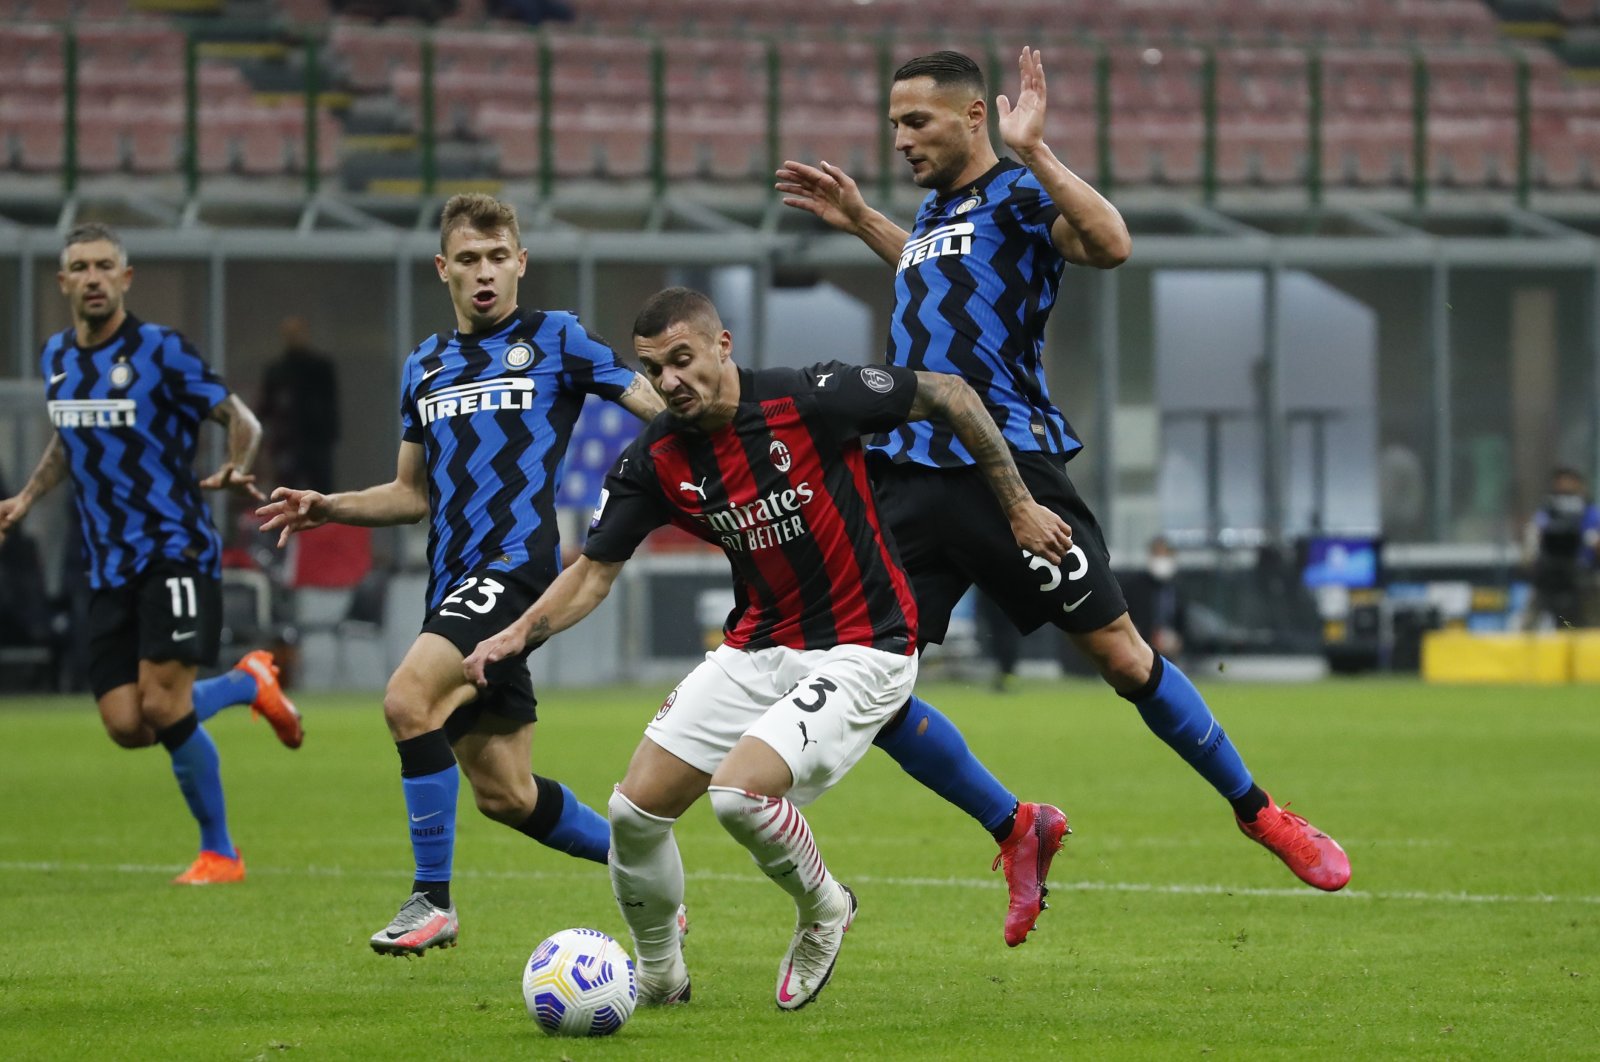 AC Milan's Rade Krunic (C) Inter Milan's Danilo D'Ambrosio (L) vie for the ball during a Serie A match at the San Siro Stadium, in Milan, Italy, Oct. 17, 2020. (AP Photo)